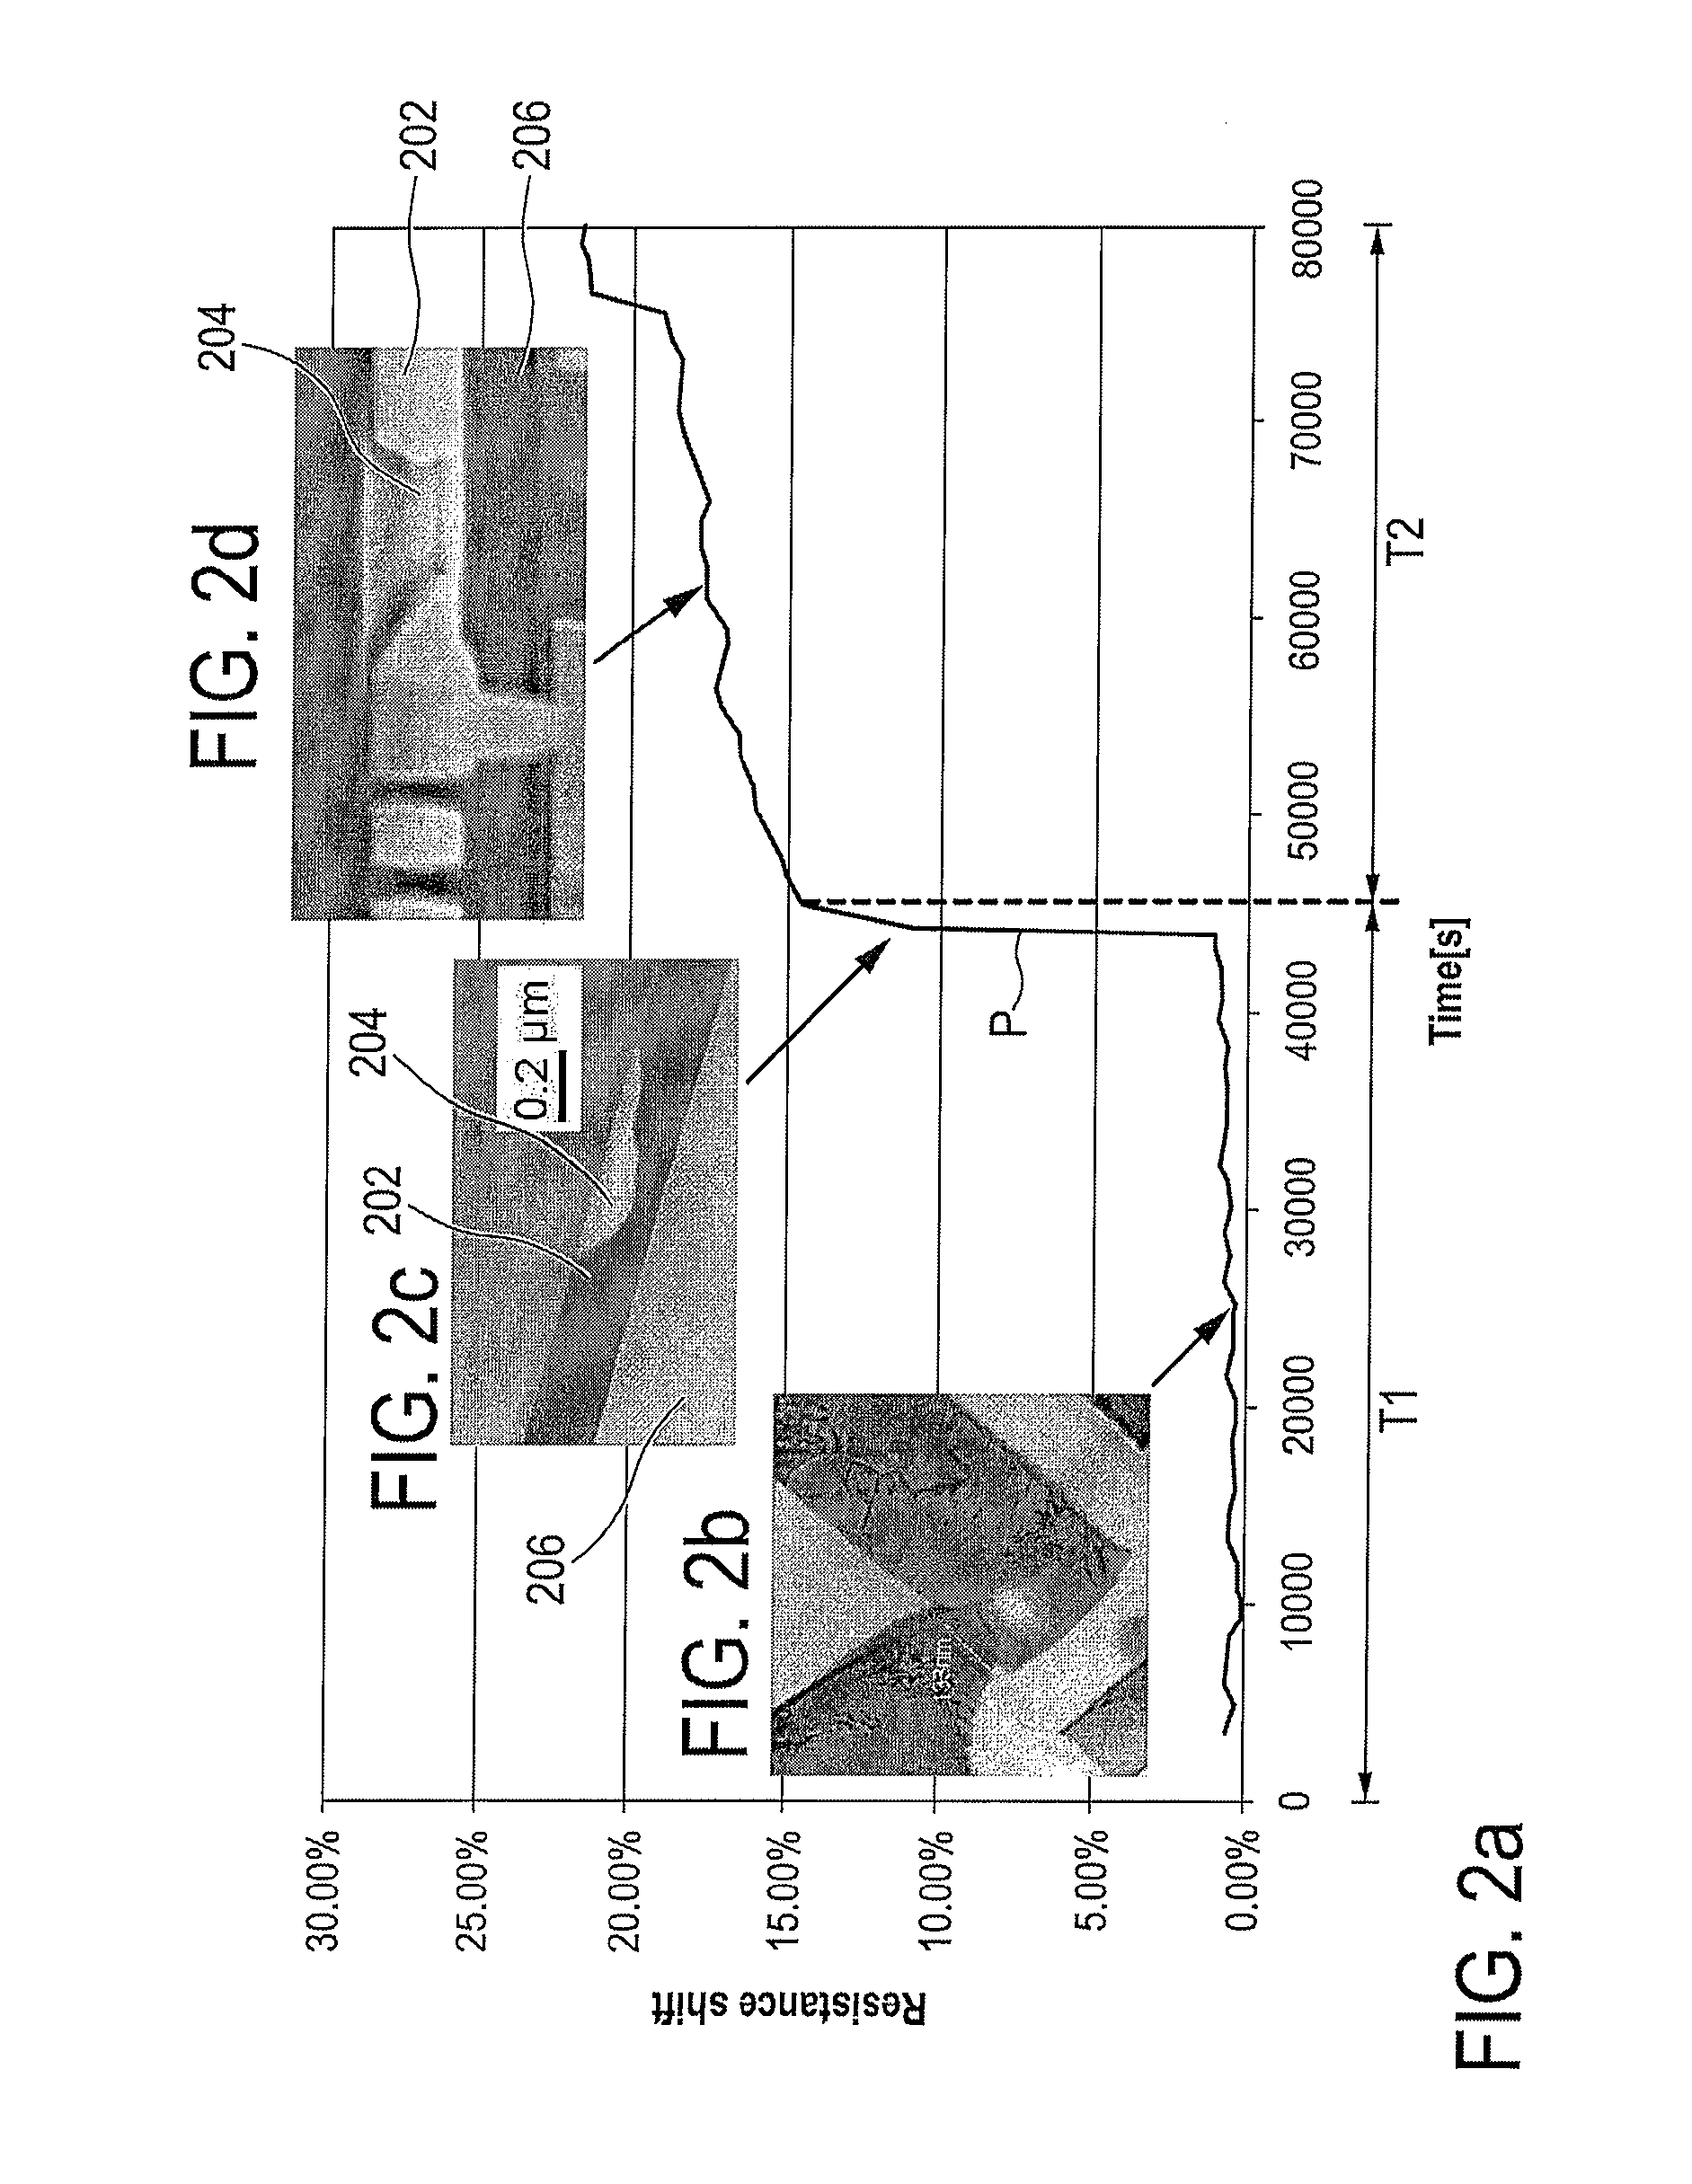 Electromigration testing and evaluation apparatus and methods